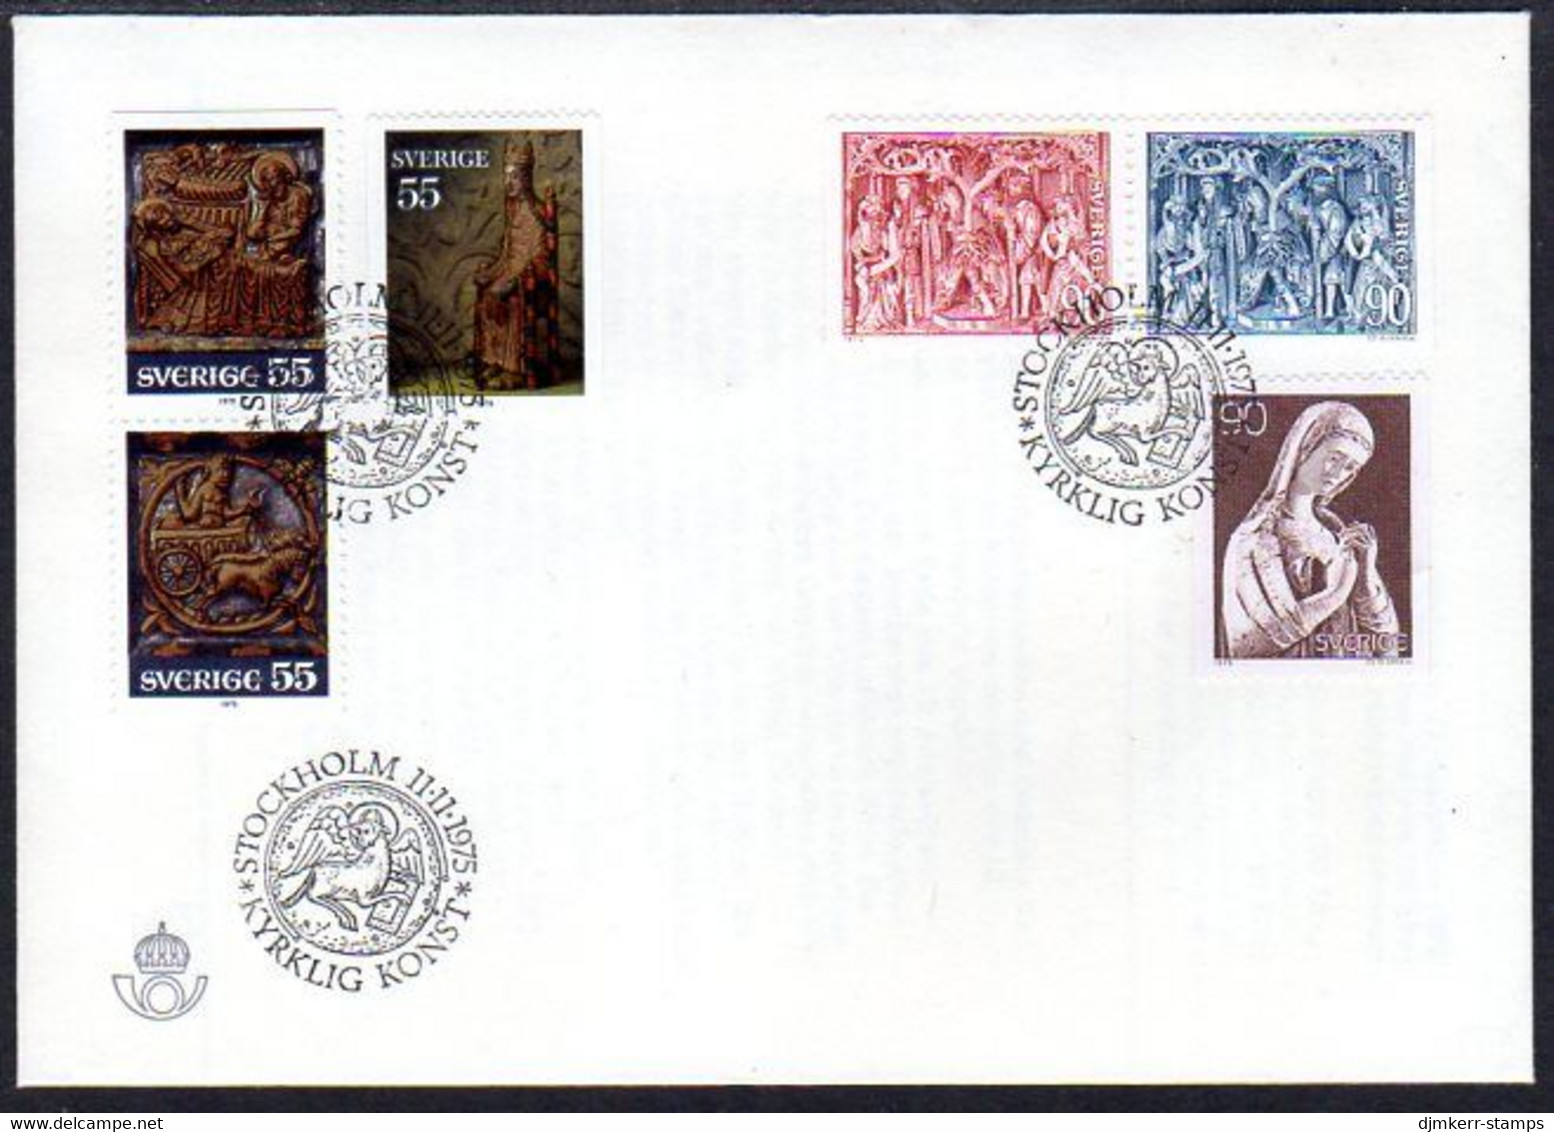 SWEDEN 1975 Christmas FDC.  Michel 926-31 - FDC